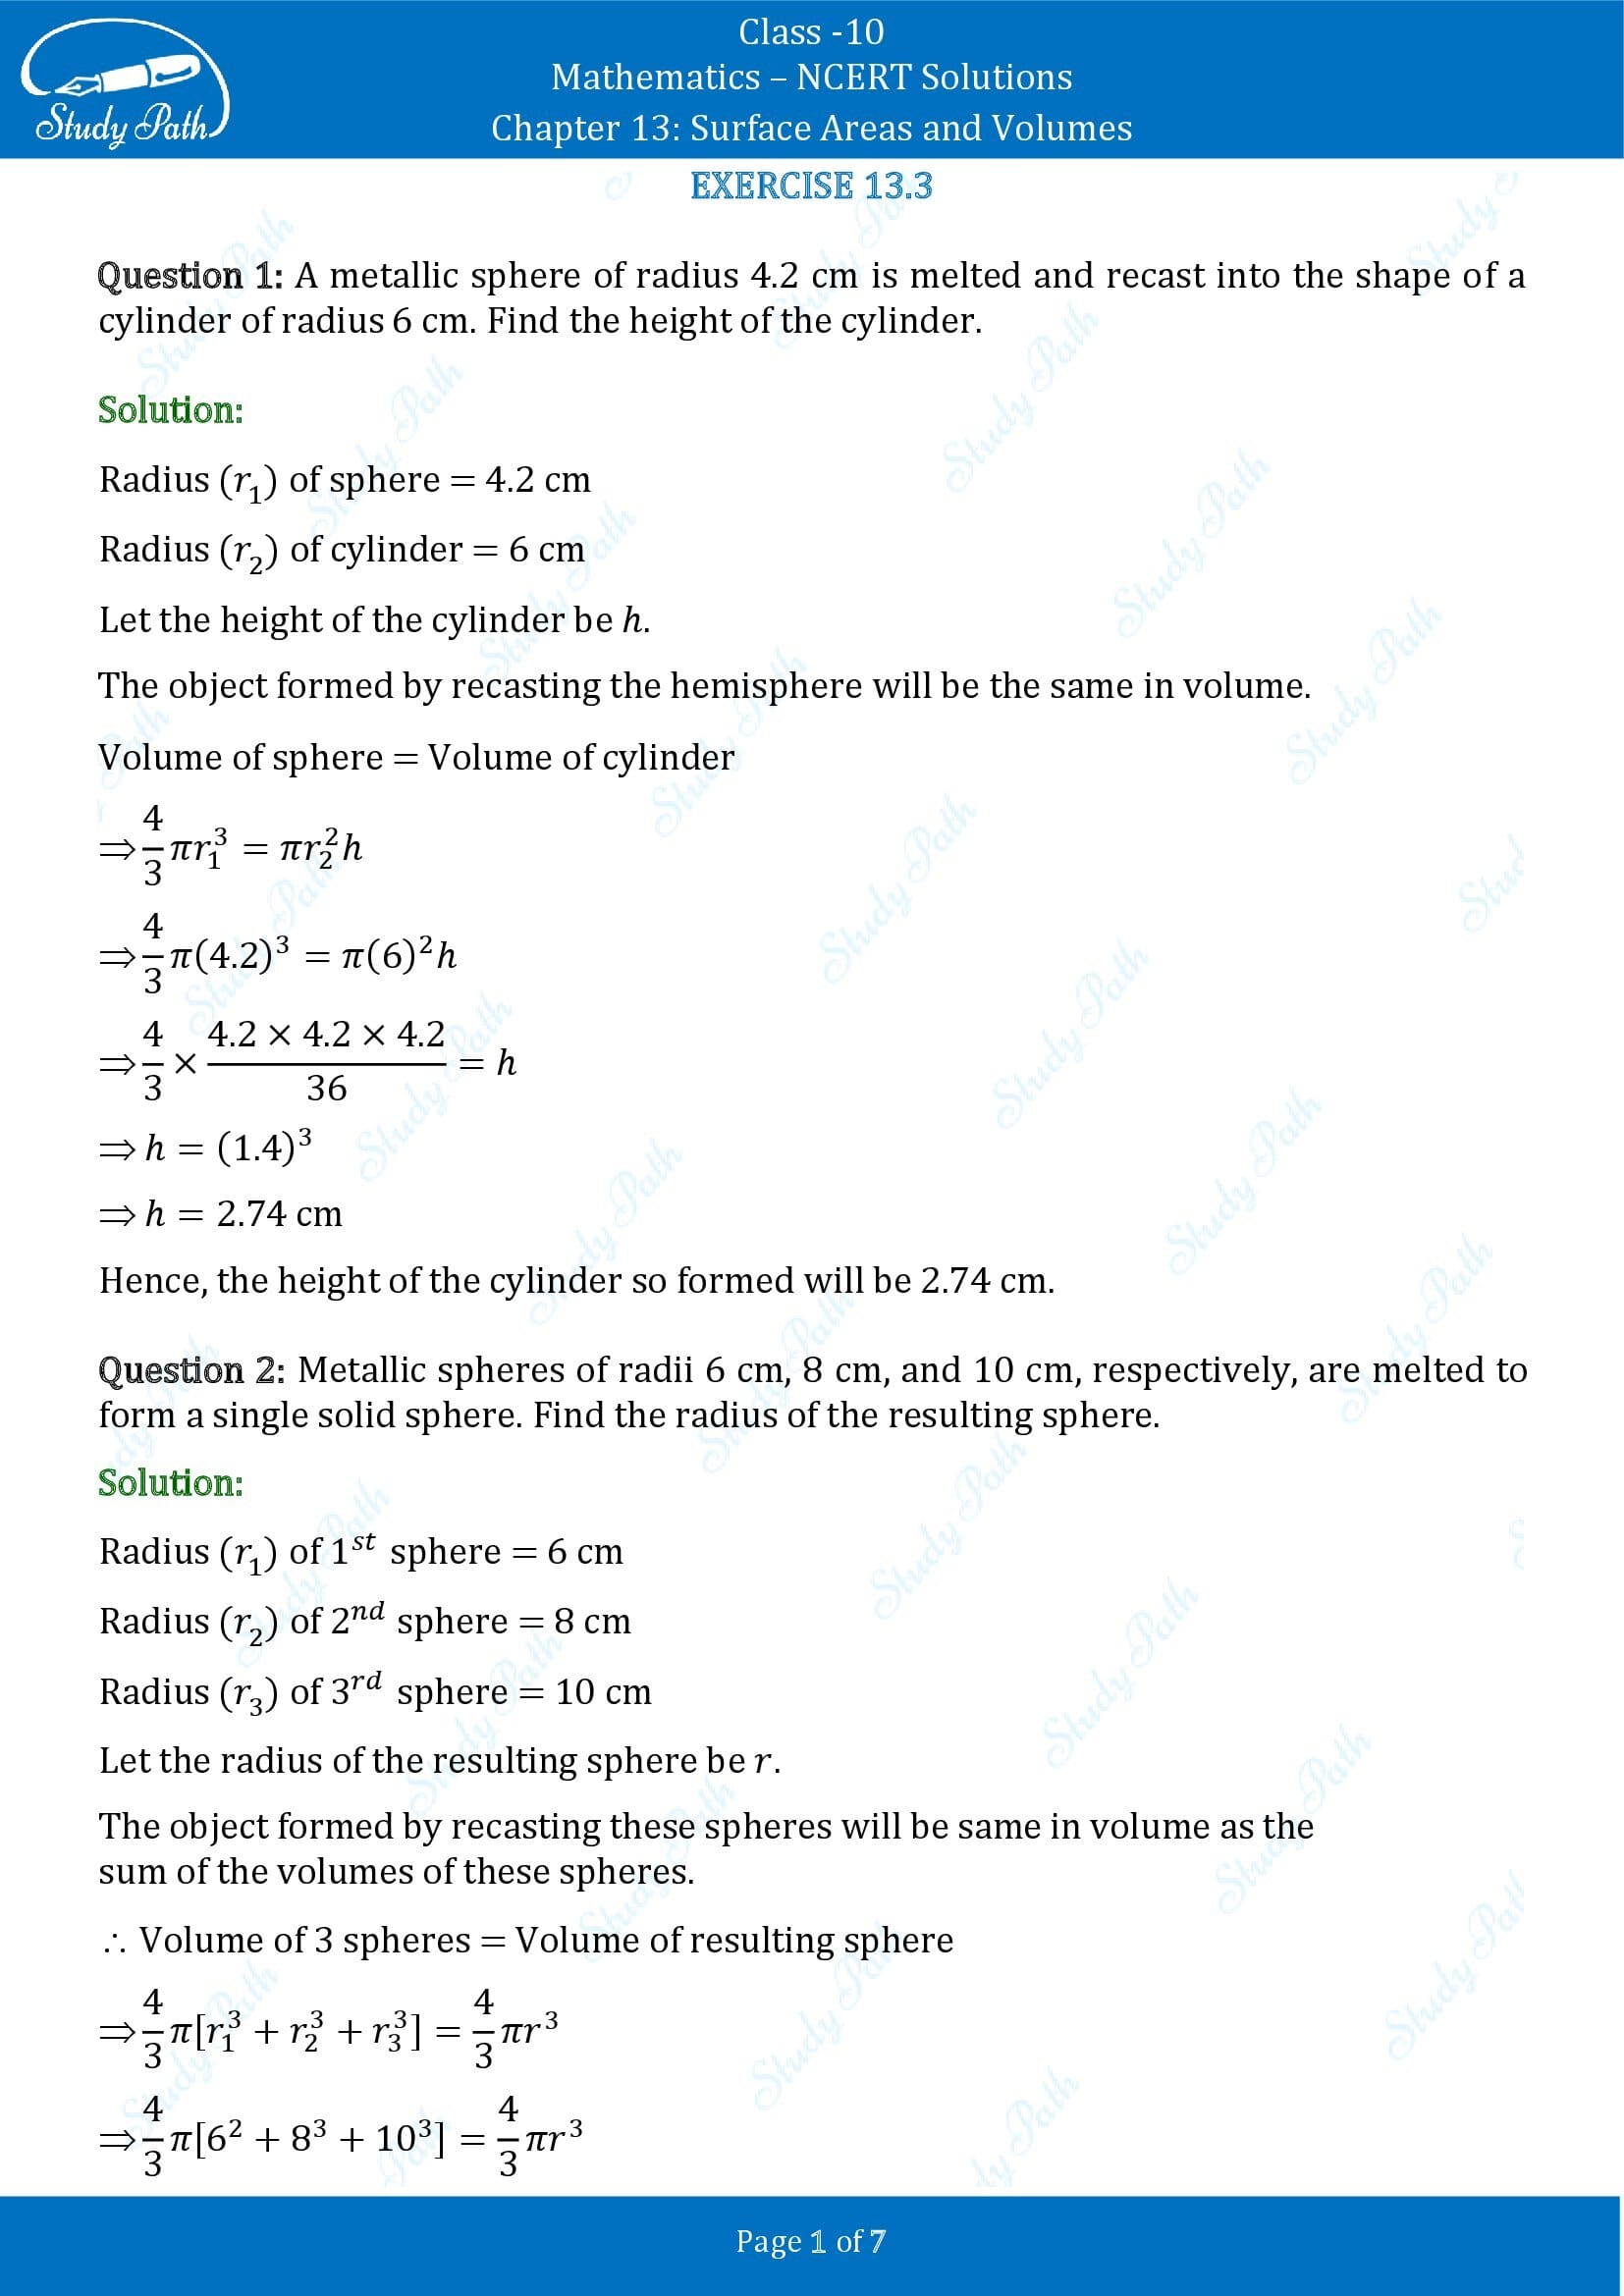 NCERT Solutions for Class 10 Maths Chapter 13 Surface Areas and Volumes Exercise 13.3 00001